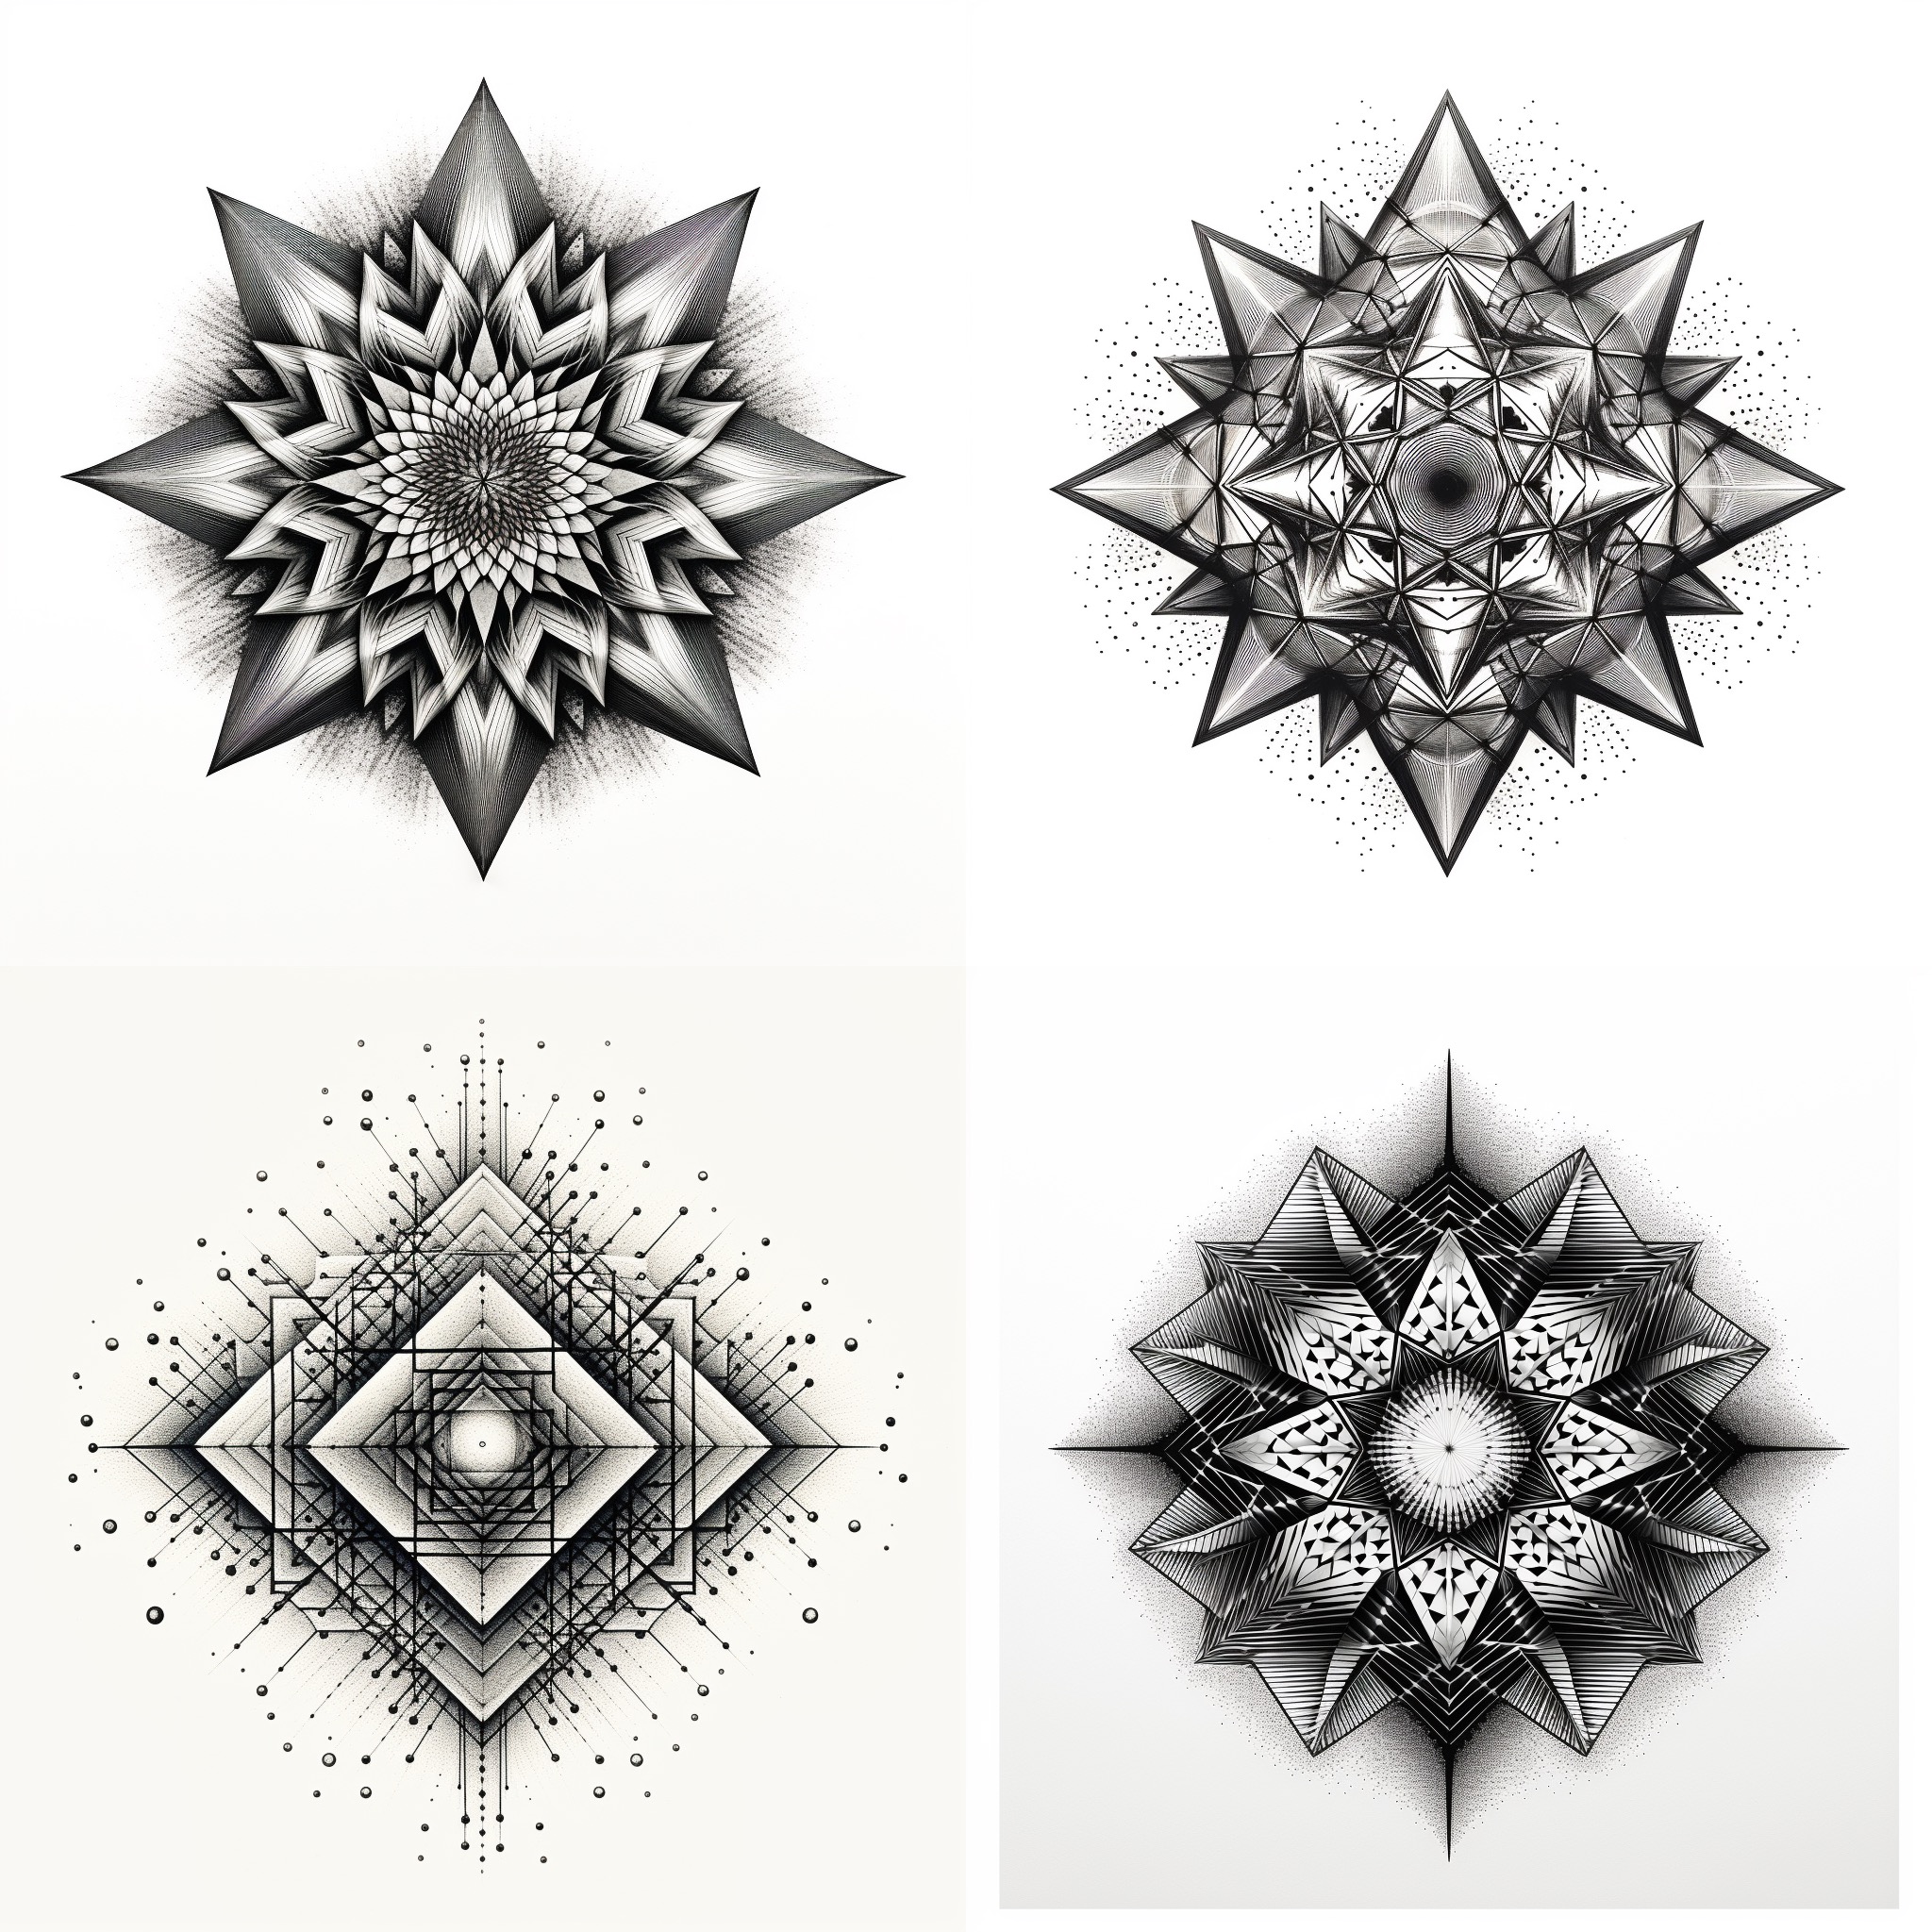 Intricate and unique tattoo design, perfect for body art